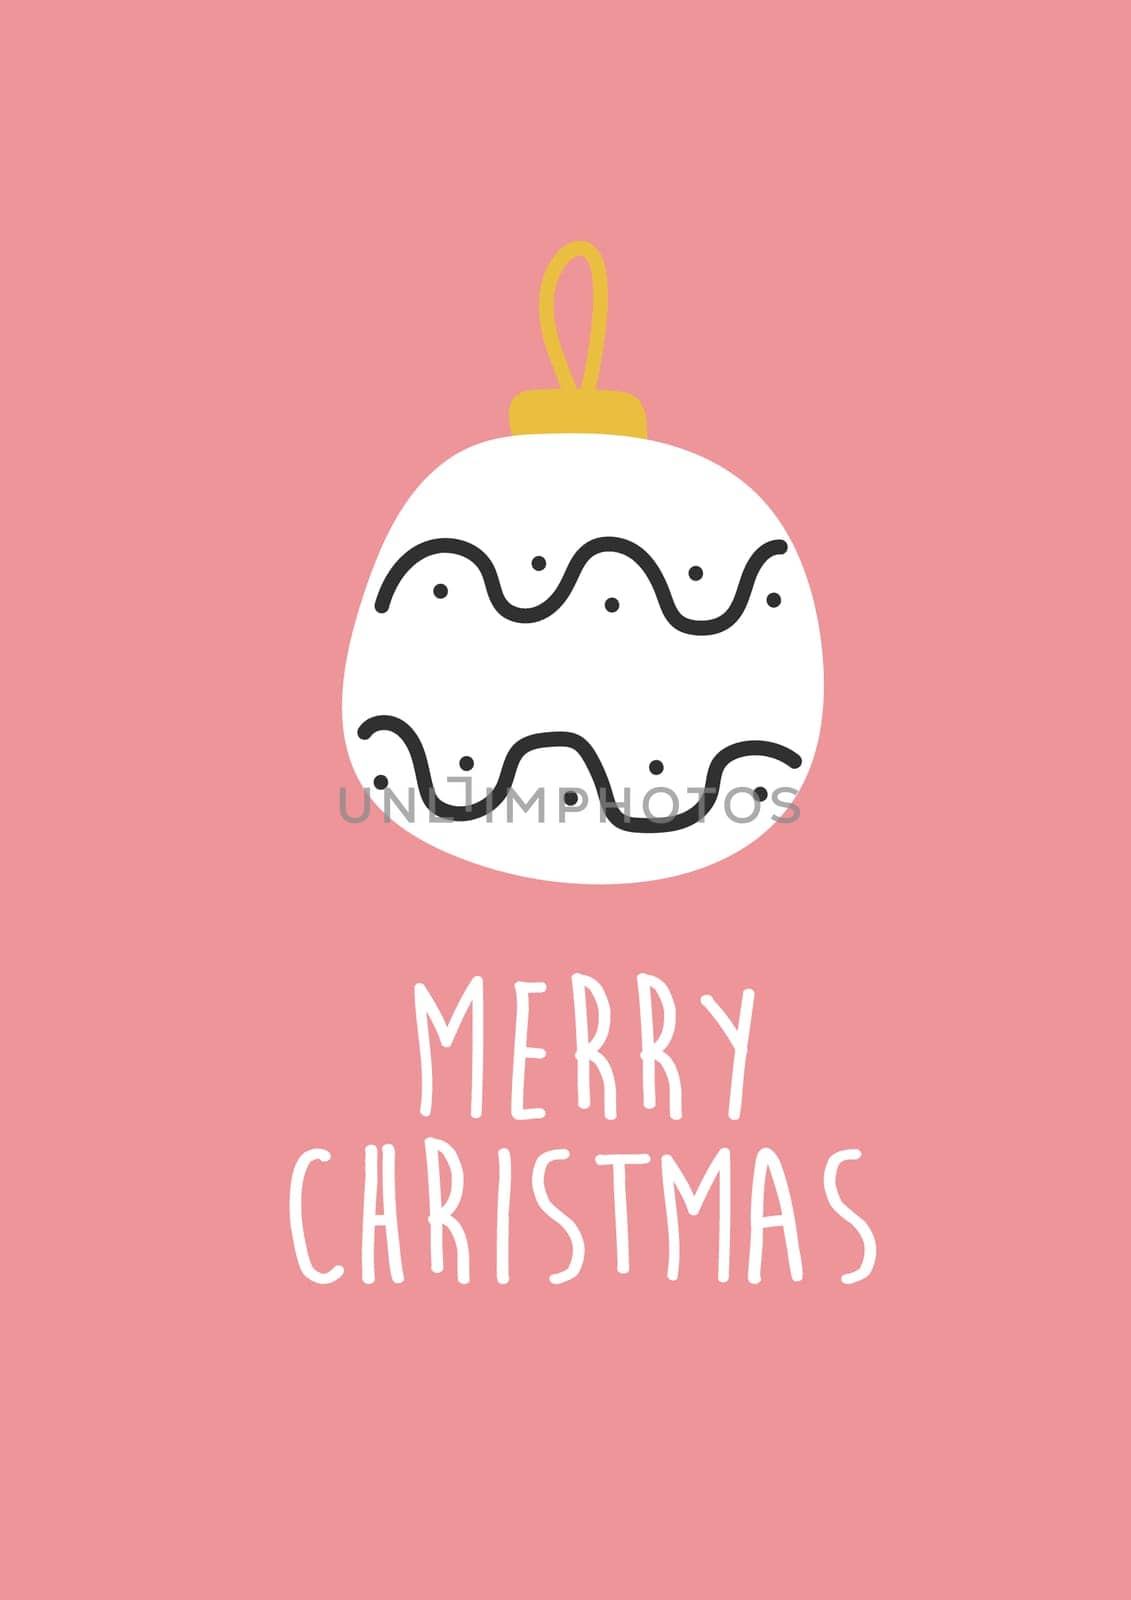 Hand drawn Christmas toy decoration. Simple modern card design, scandinavian by natali_brill